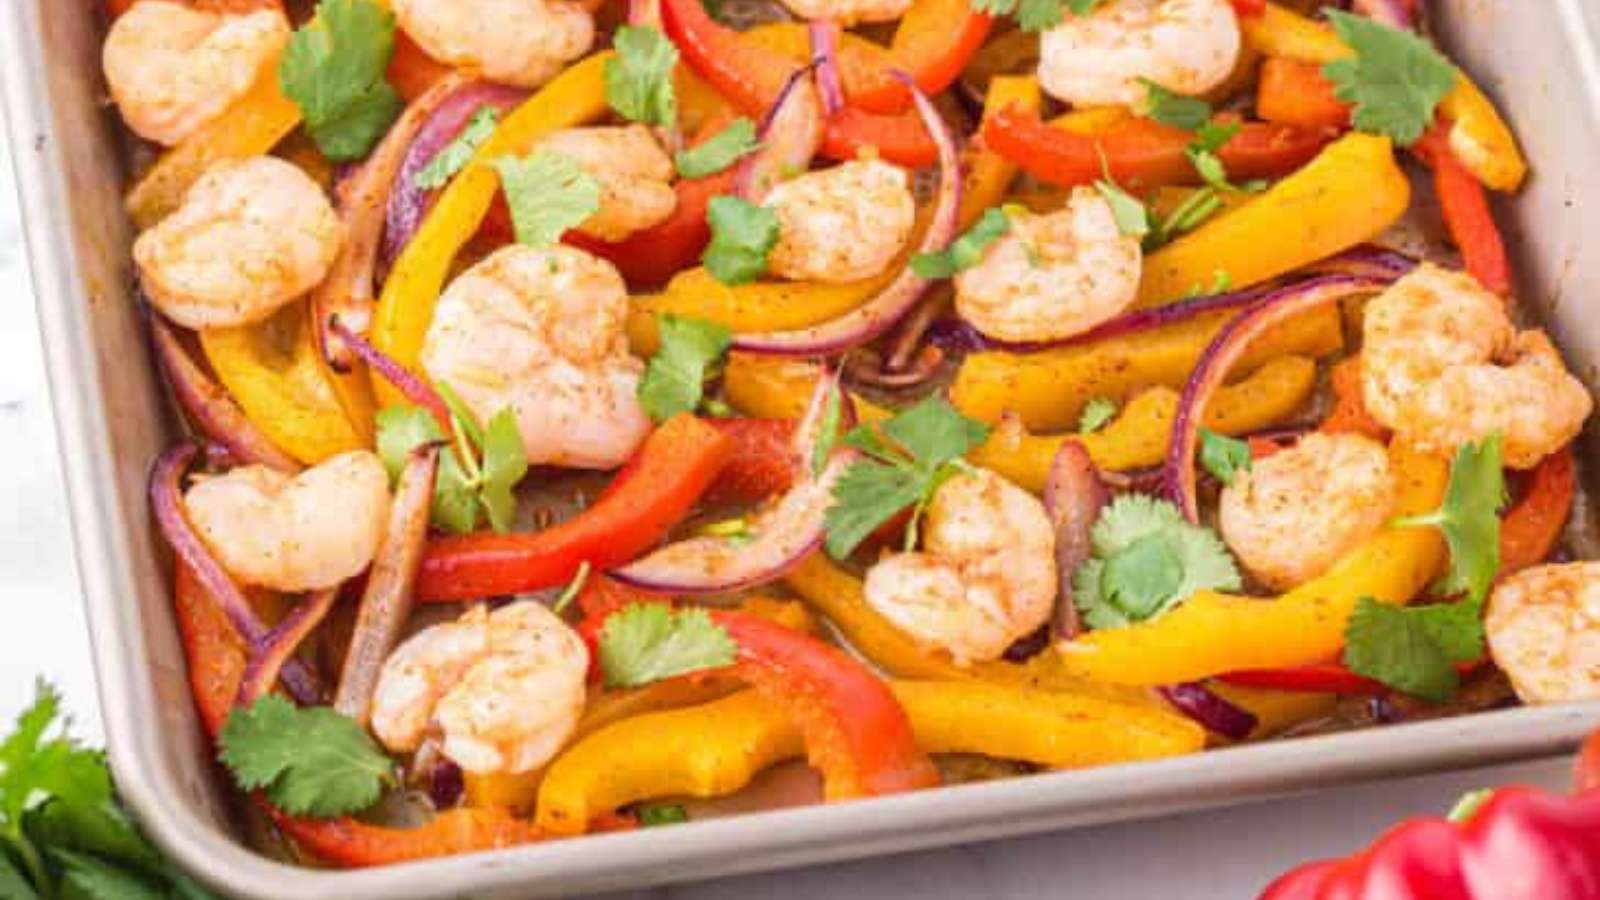 Shrimp and peppers in a baking dish.